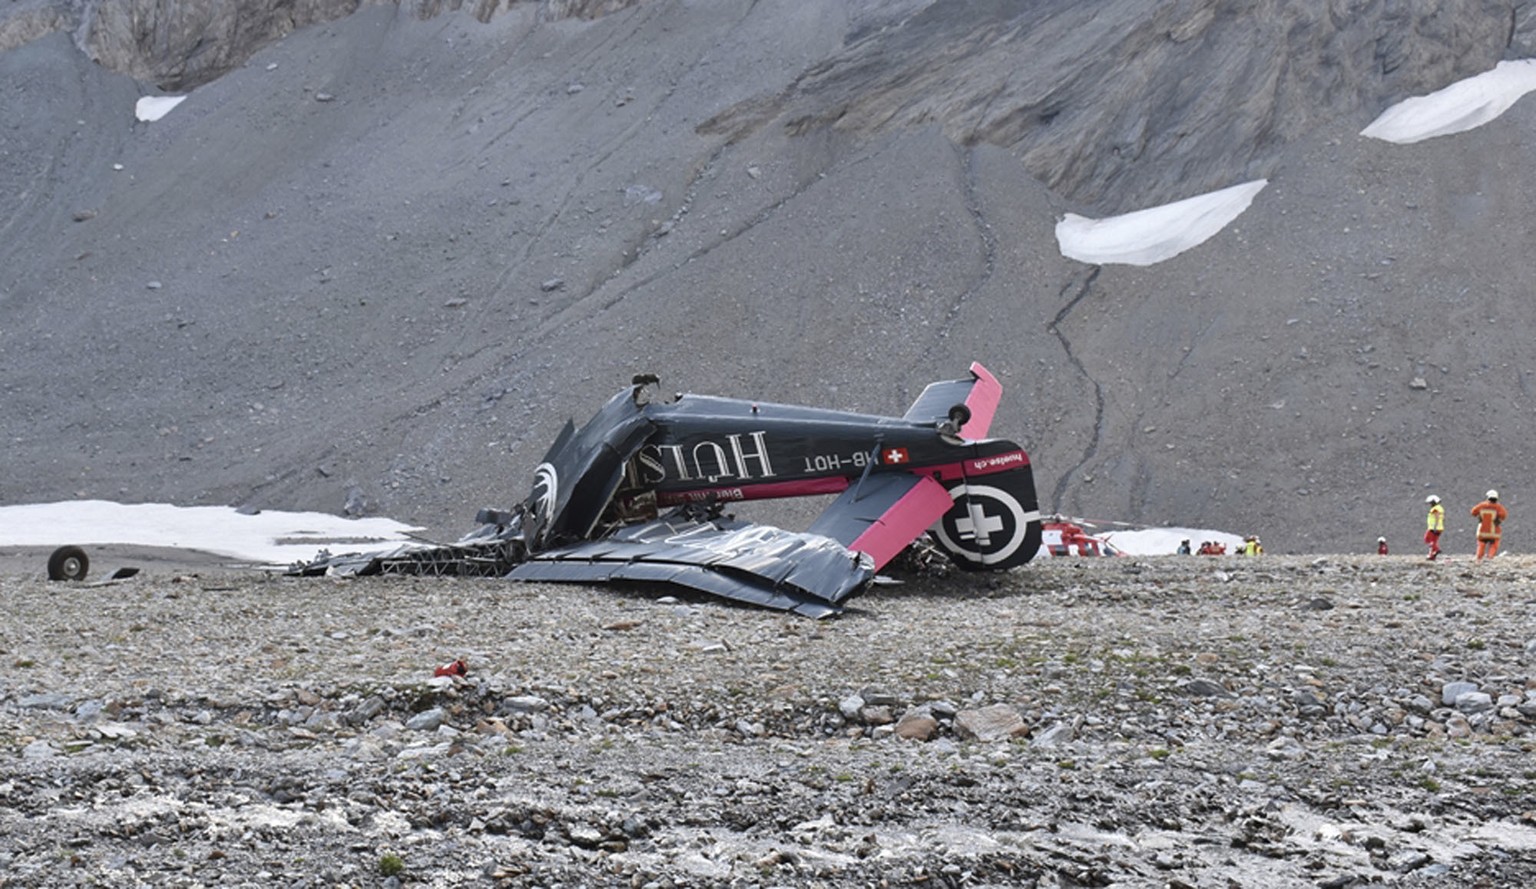 The photo provided by Police Graubuenden shows the wreckage of the old-time propeller plane Ju 52 after it went down went down Saturday Aug, 4 2018 on the Piz Segnas mountain above the Swiss Alpine re ...